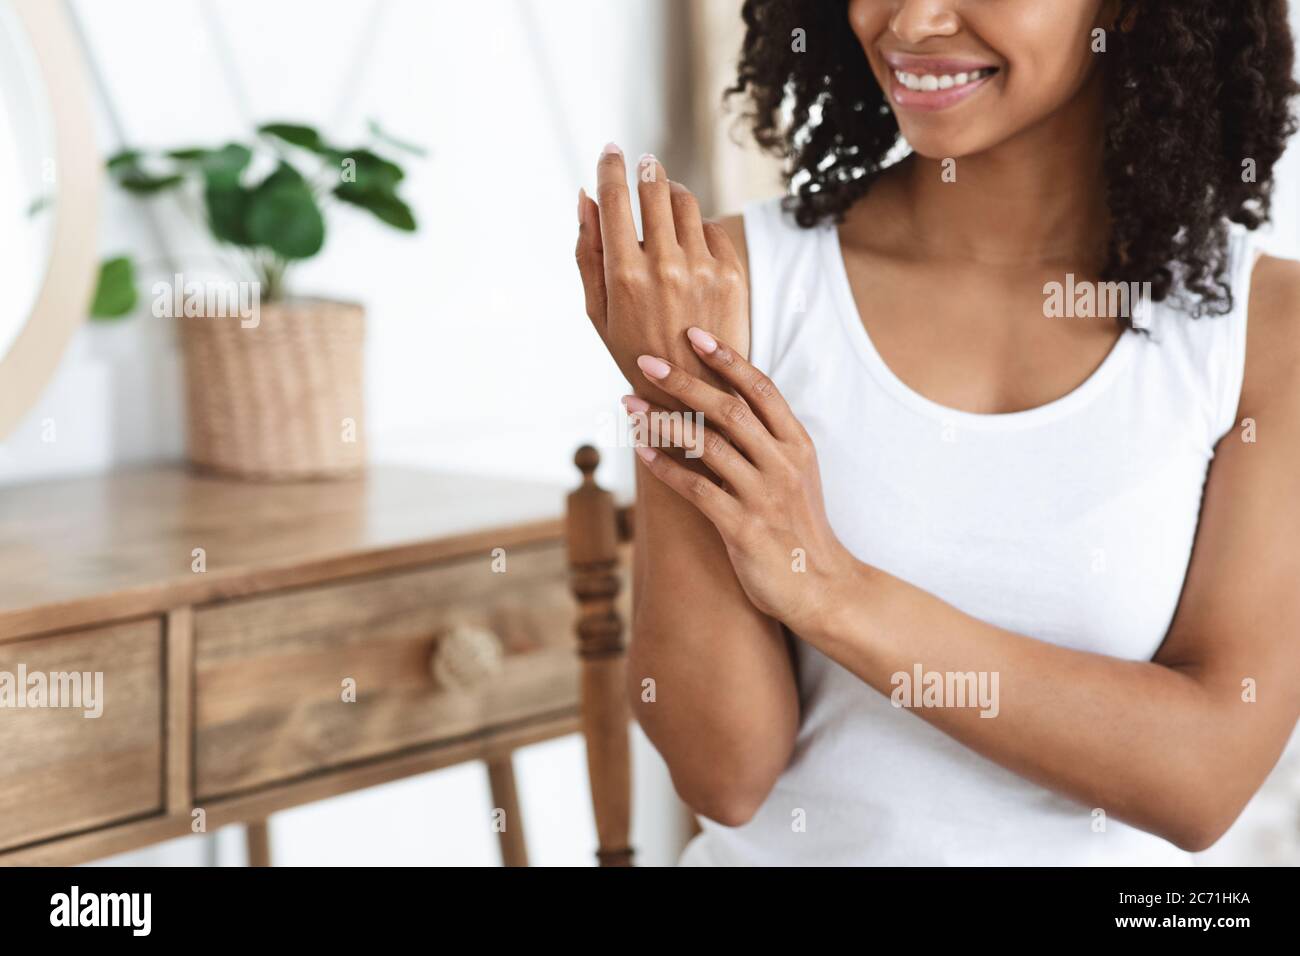 Anti-Aging Hand Care. Smiling African Woman Touching Her Soft Body Skin Stock Photo